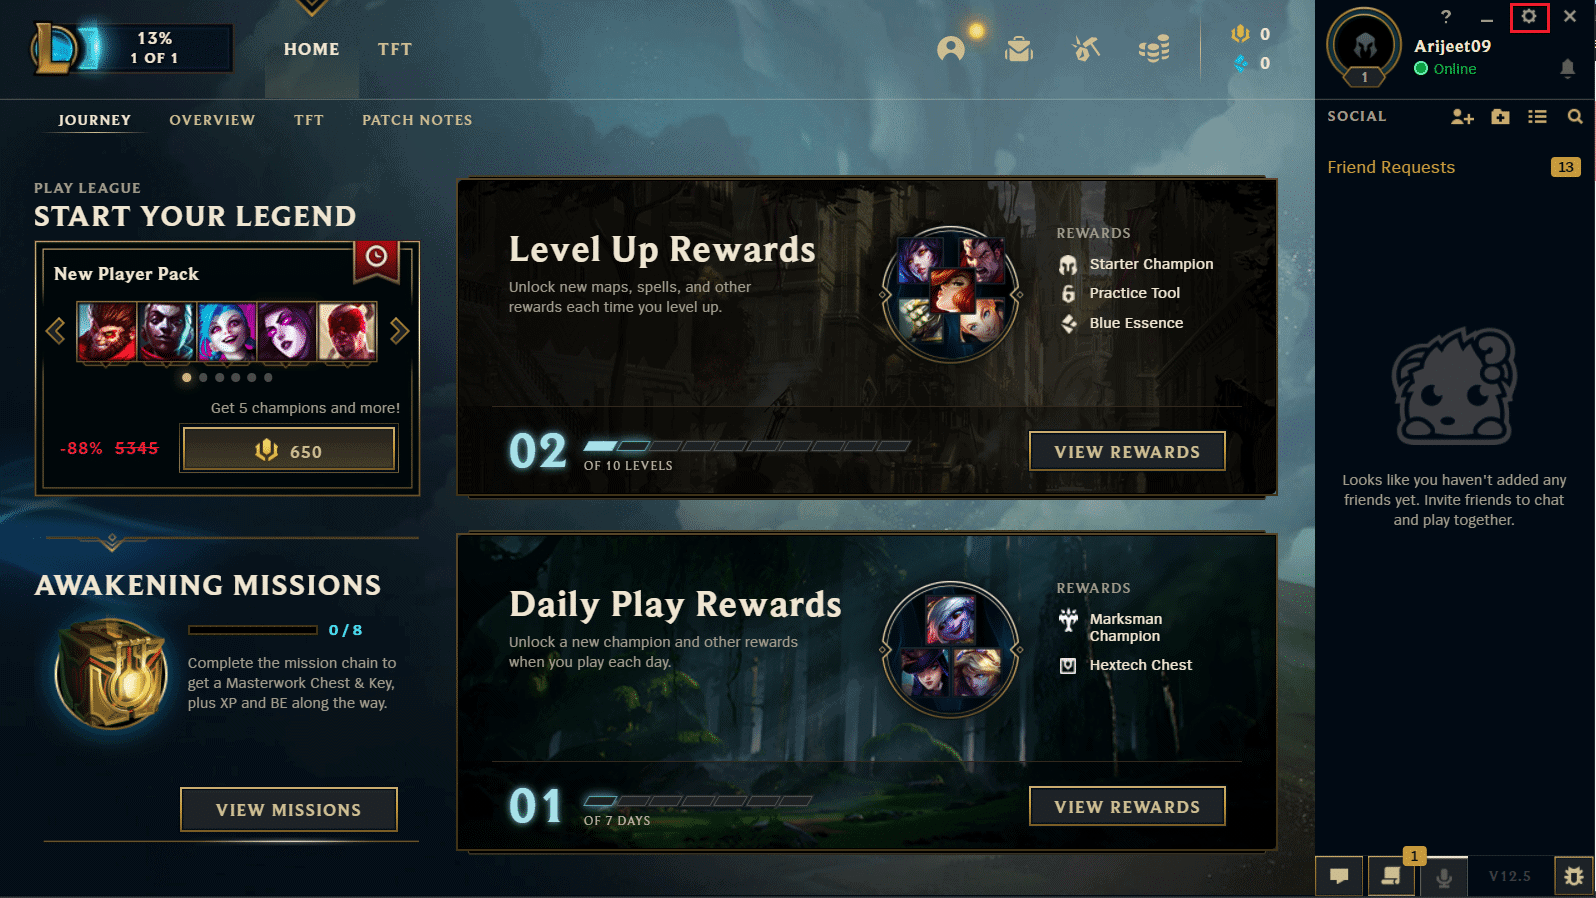 Open the League of Legends client.
Click on the "Settings" (gear) icon in the top right corner.